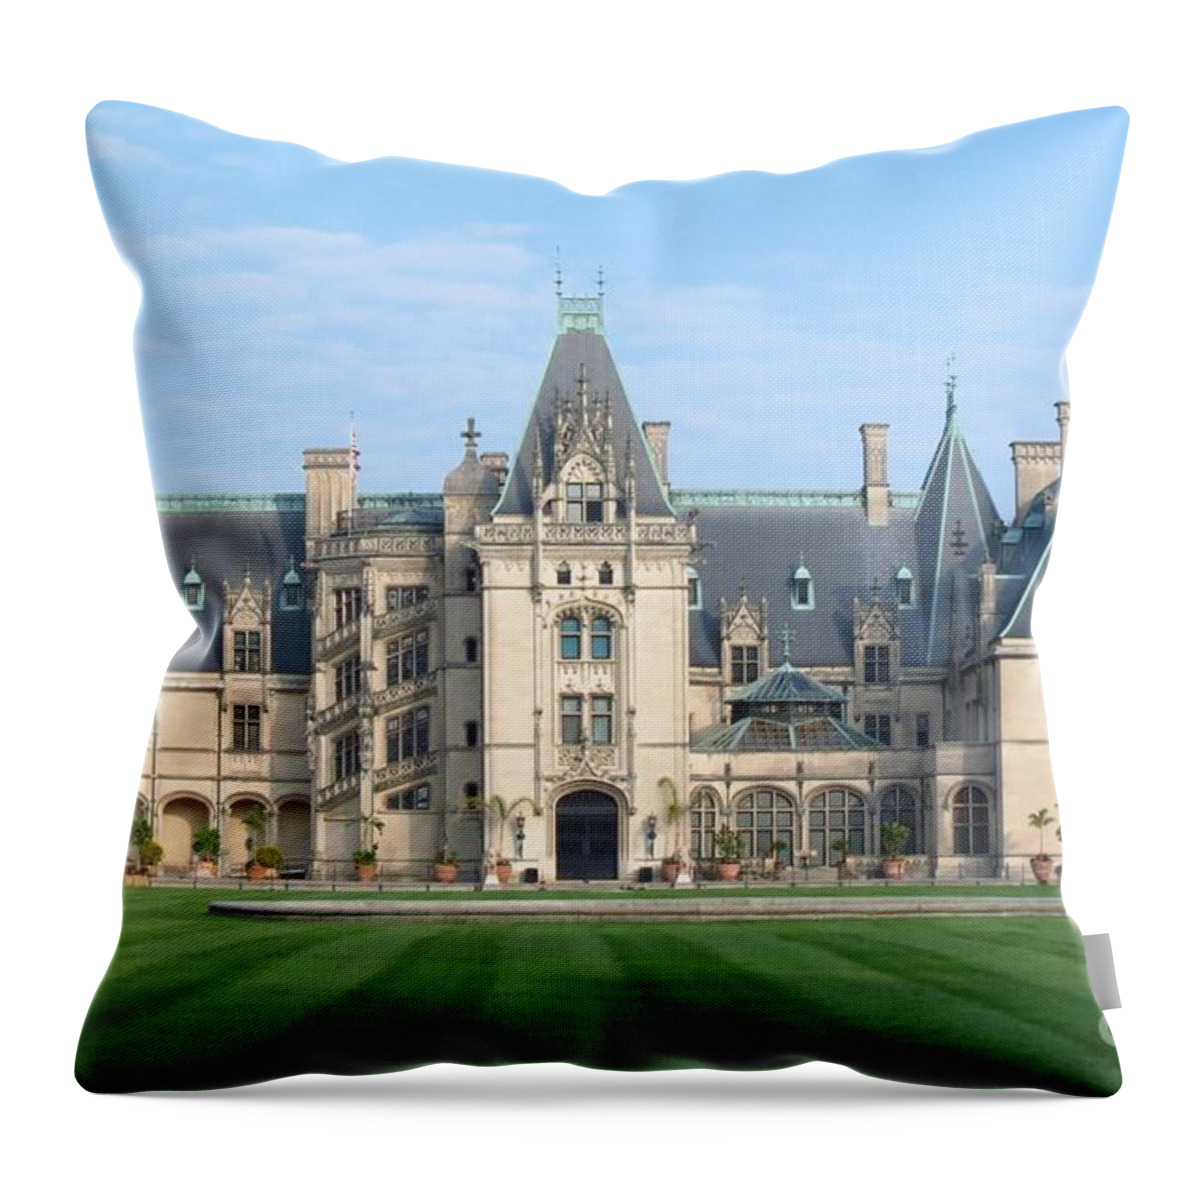 Architecture. Biltmore Estate Throw Pillow featuring the photograph The Biltmore House by Anita Adams